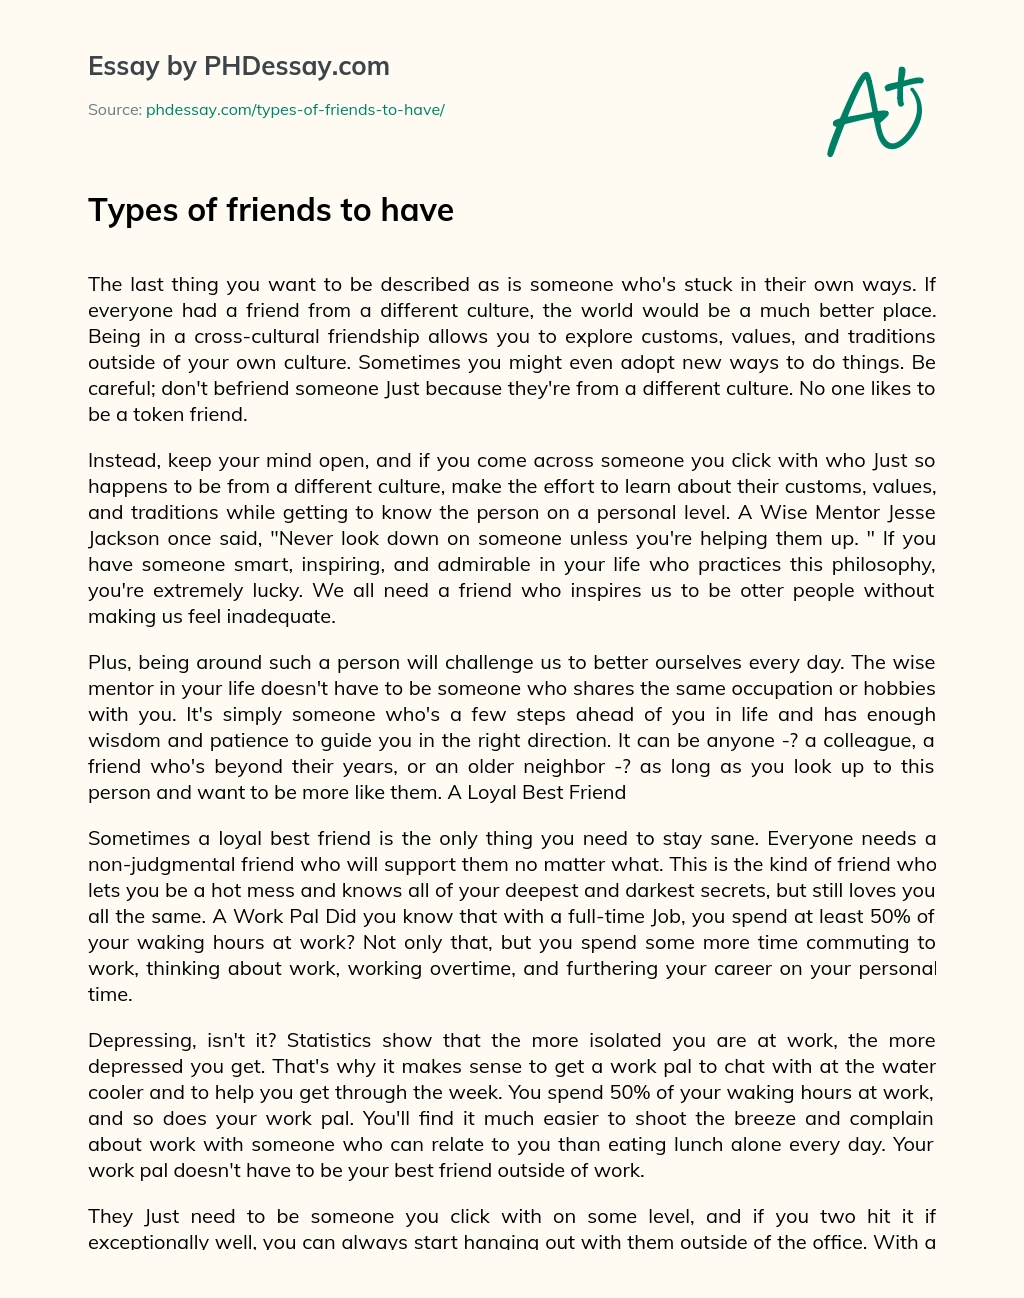 Types of friends to have essay